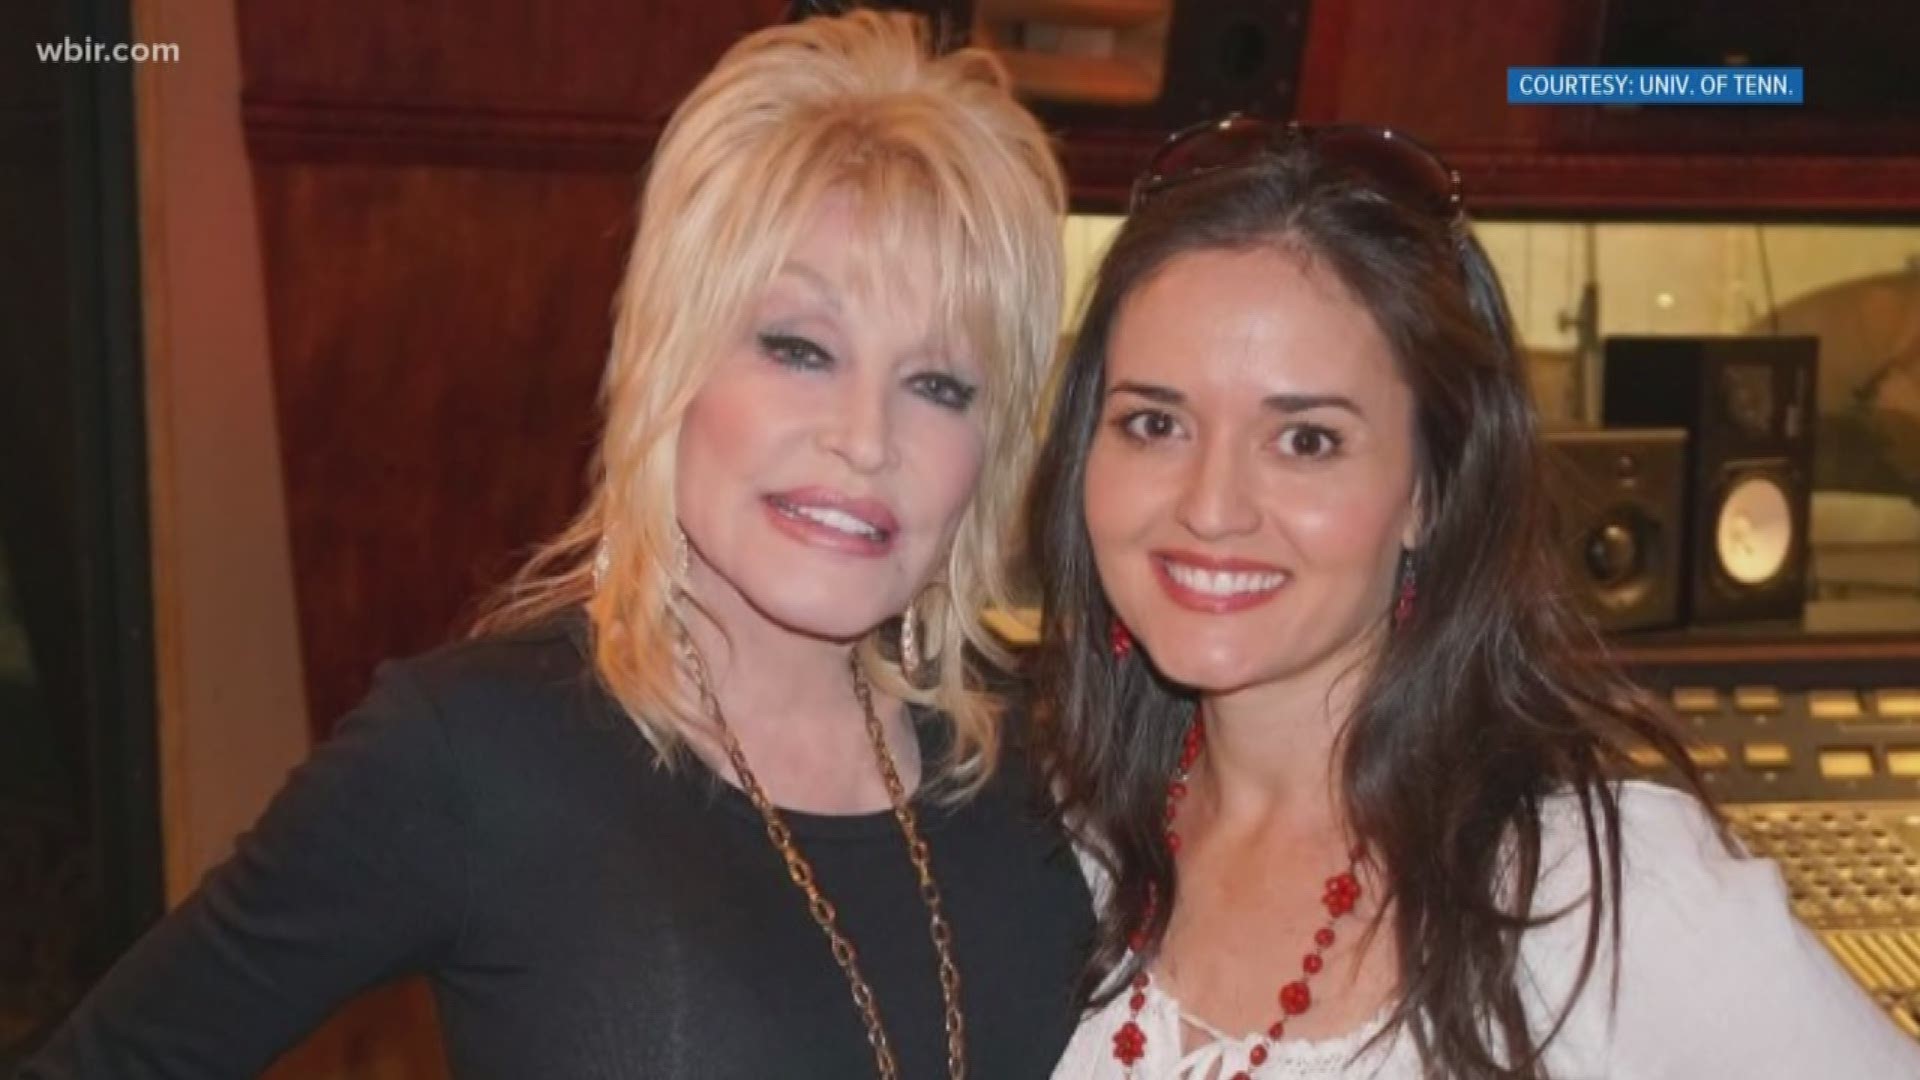 Dolly Parton says she is thrilled actress and author Danica McKellar will narrate the upcoming documentary about Dolly's Imagination Library.